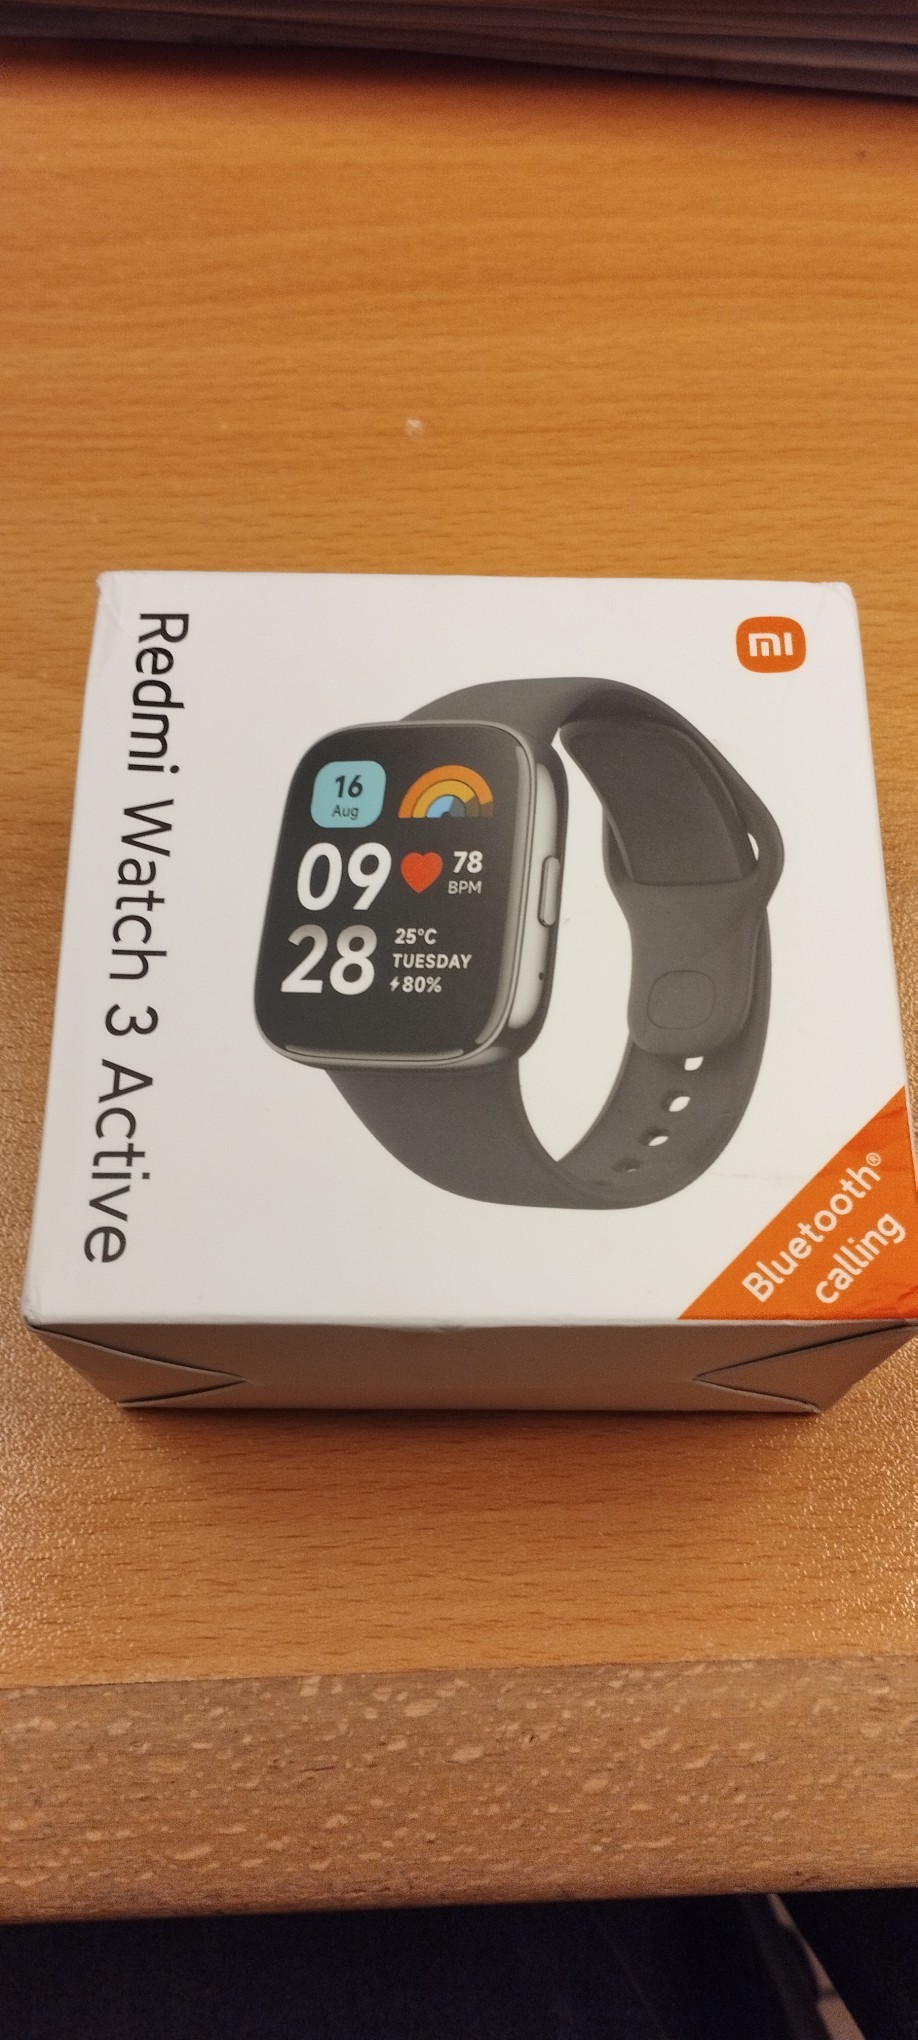 Redmi Watch 3 Active review: Feature-packed budget smartwatch